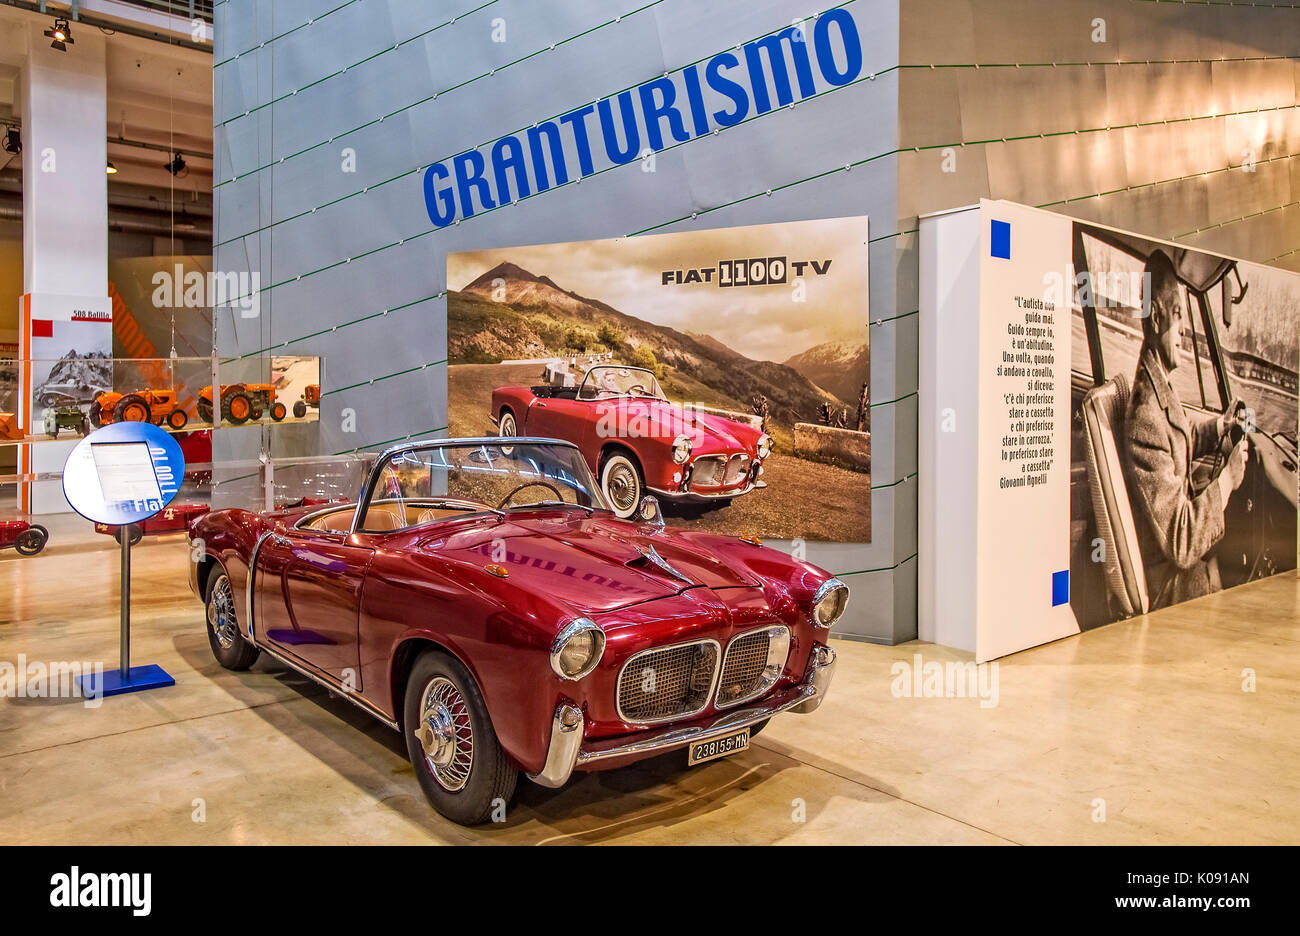 The Fiat Centro Storico is a museum and business archive based in Turin. Exposes cars, planes, trains, tractors, trucks, bicycles, washing machines, refrigerators with Fiat brand - Fiat 1100 Granturismo Stock Photo